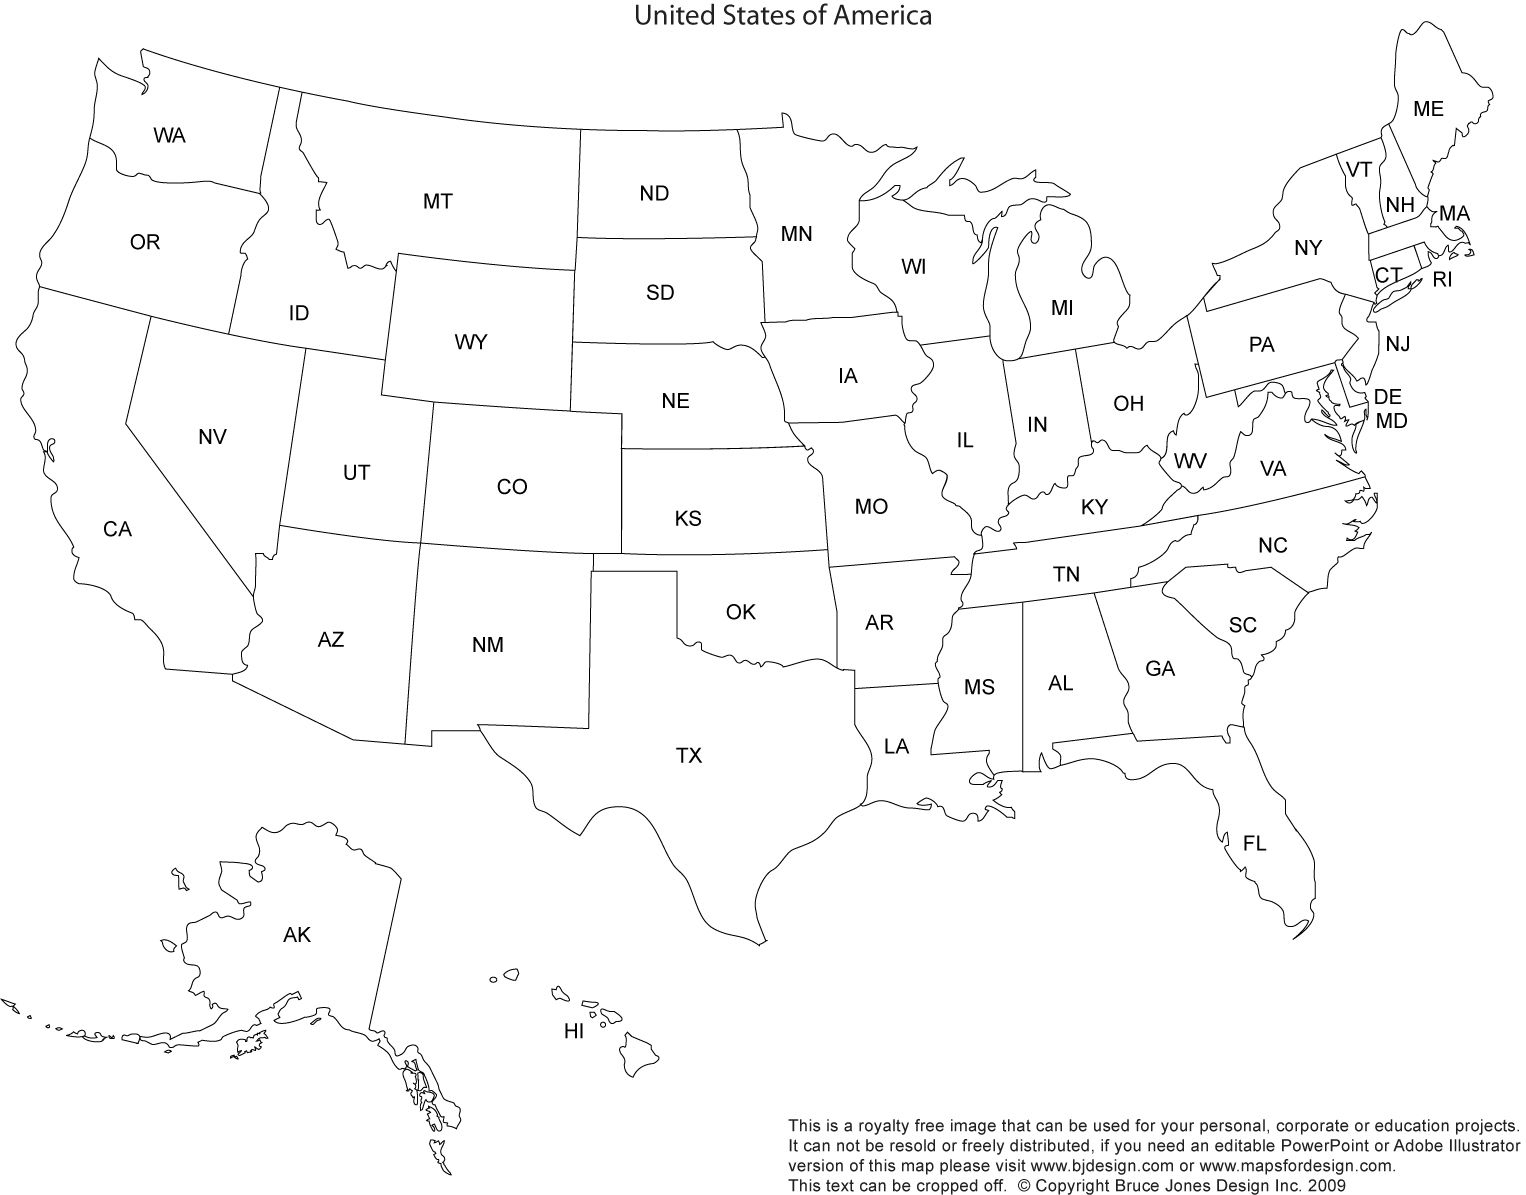 Print Out A Blank Map Of The Us And Have The Kids Color In States - Free Printable State Maps